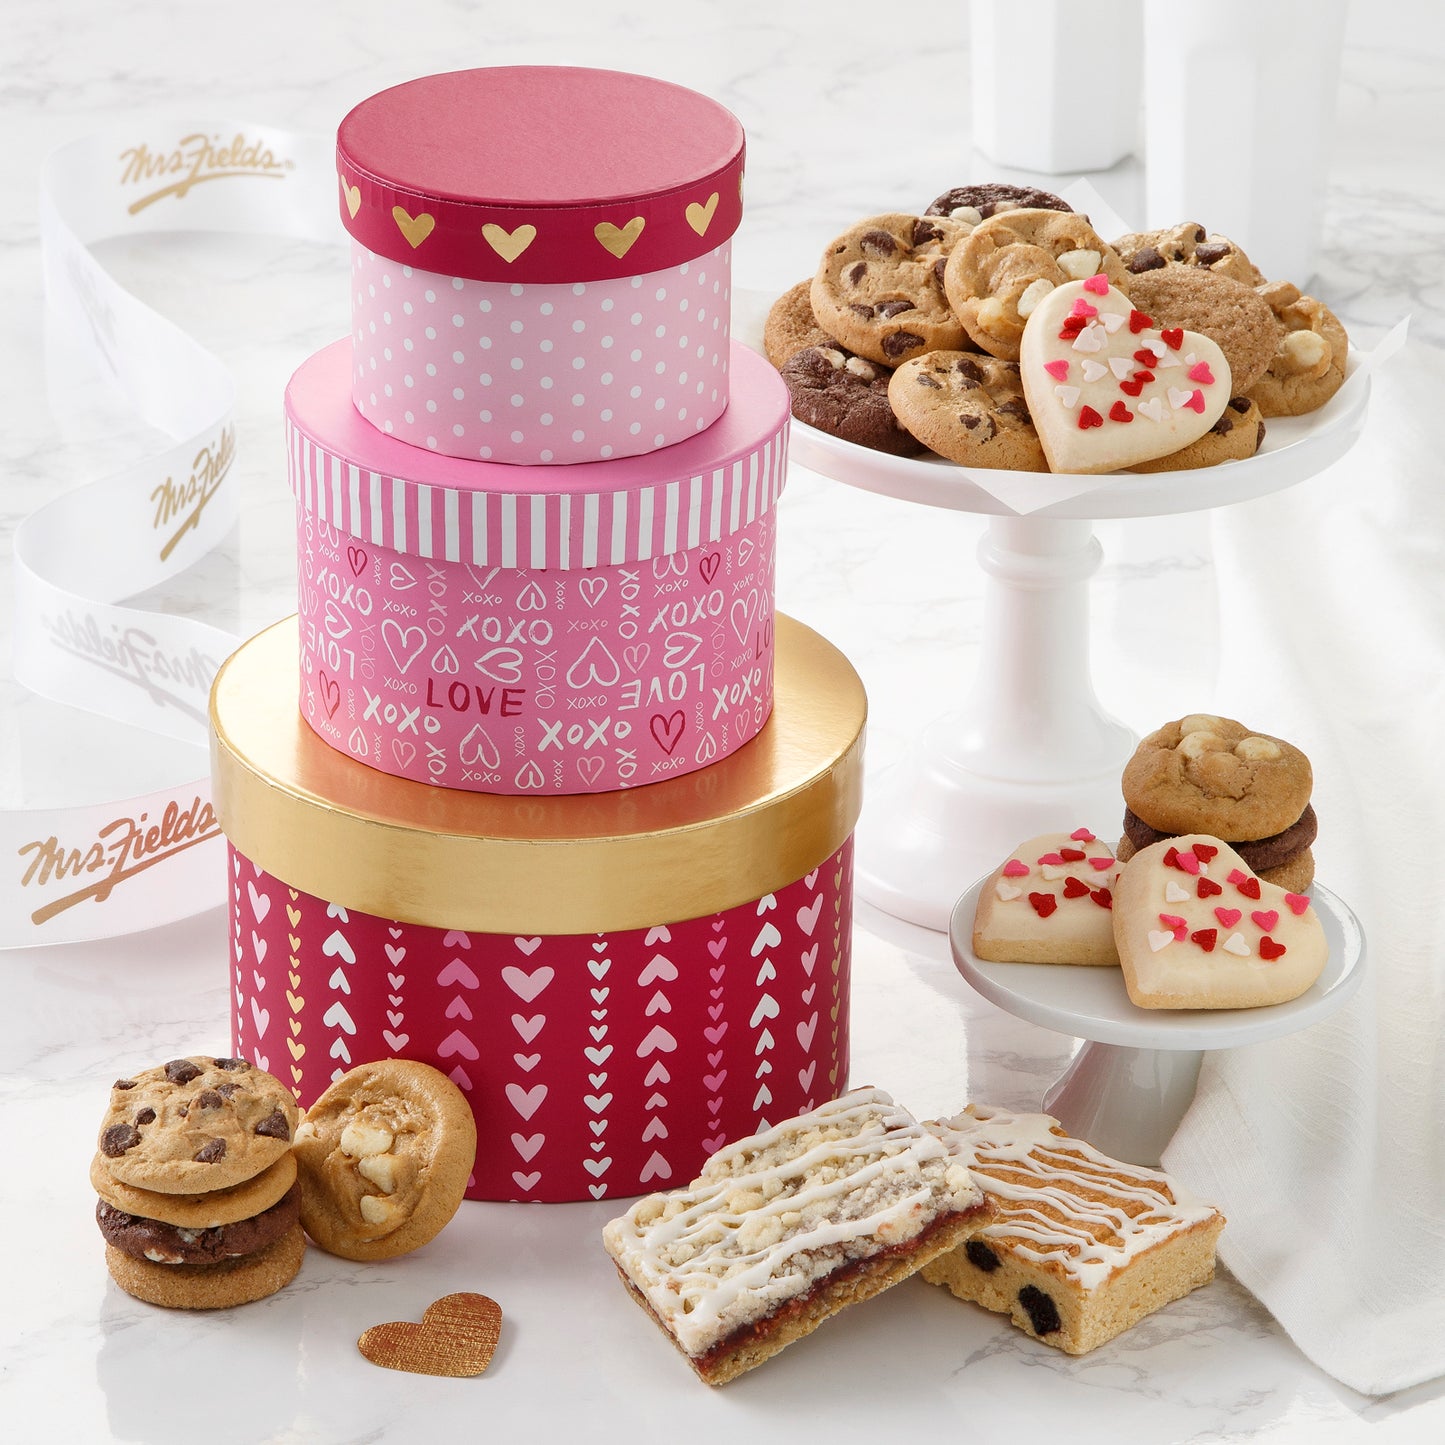 A pink, red, and gold three tier mini tower decorated with hearts and love sentiments and surrounded with nibblers, mini frosted cookies, and fruit bars.